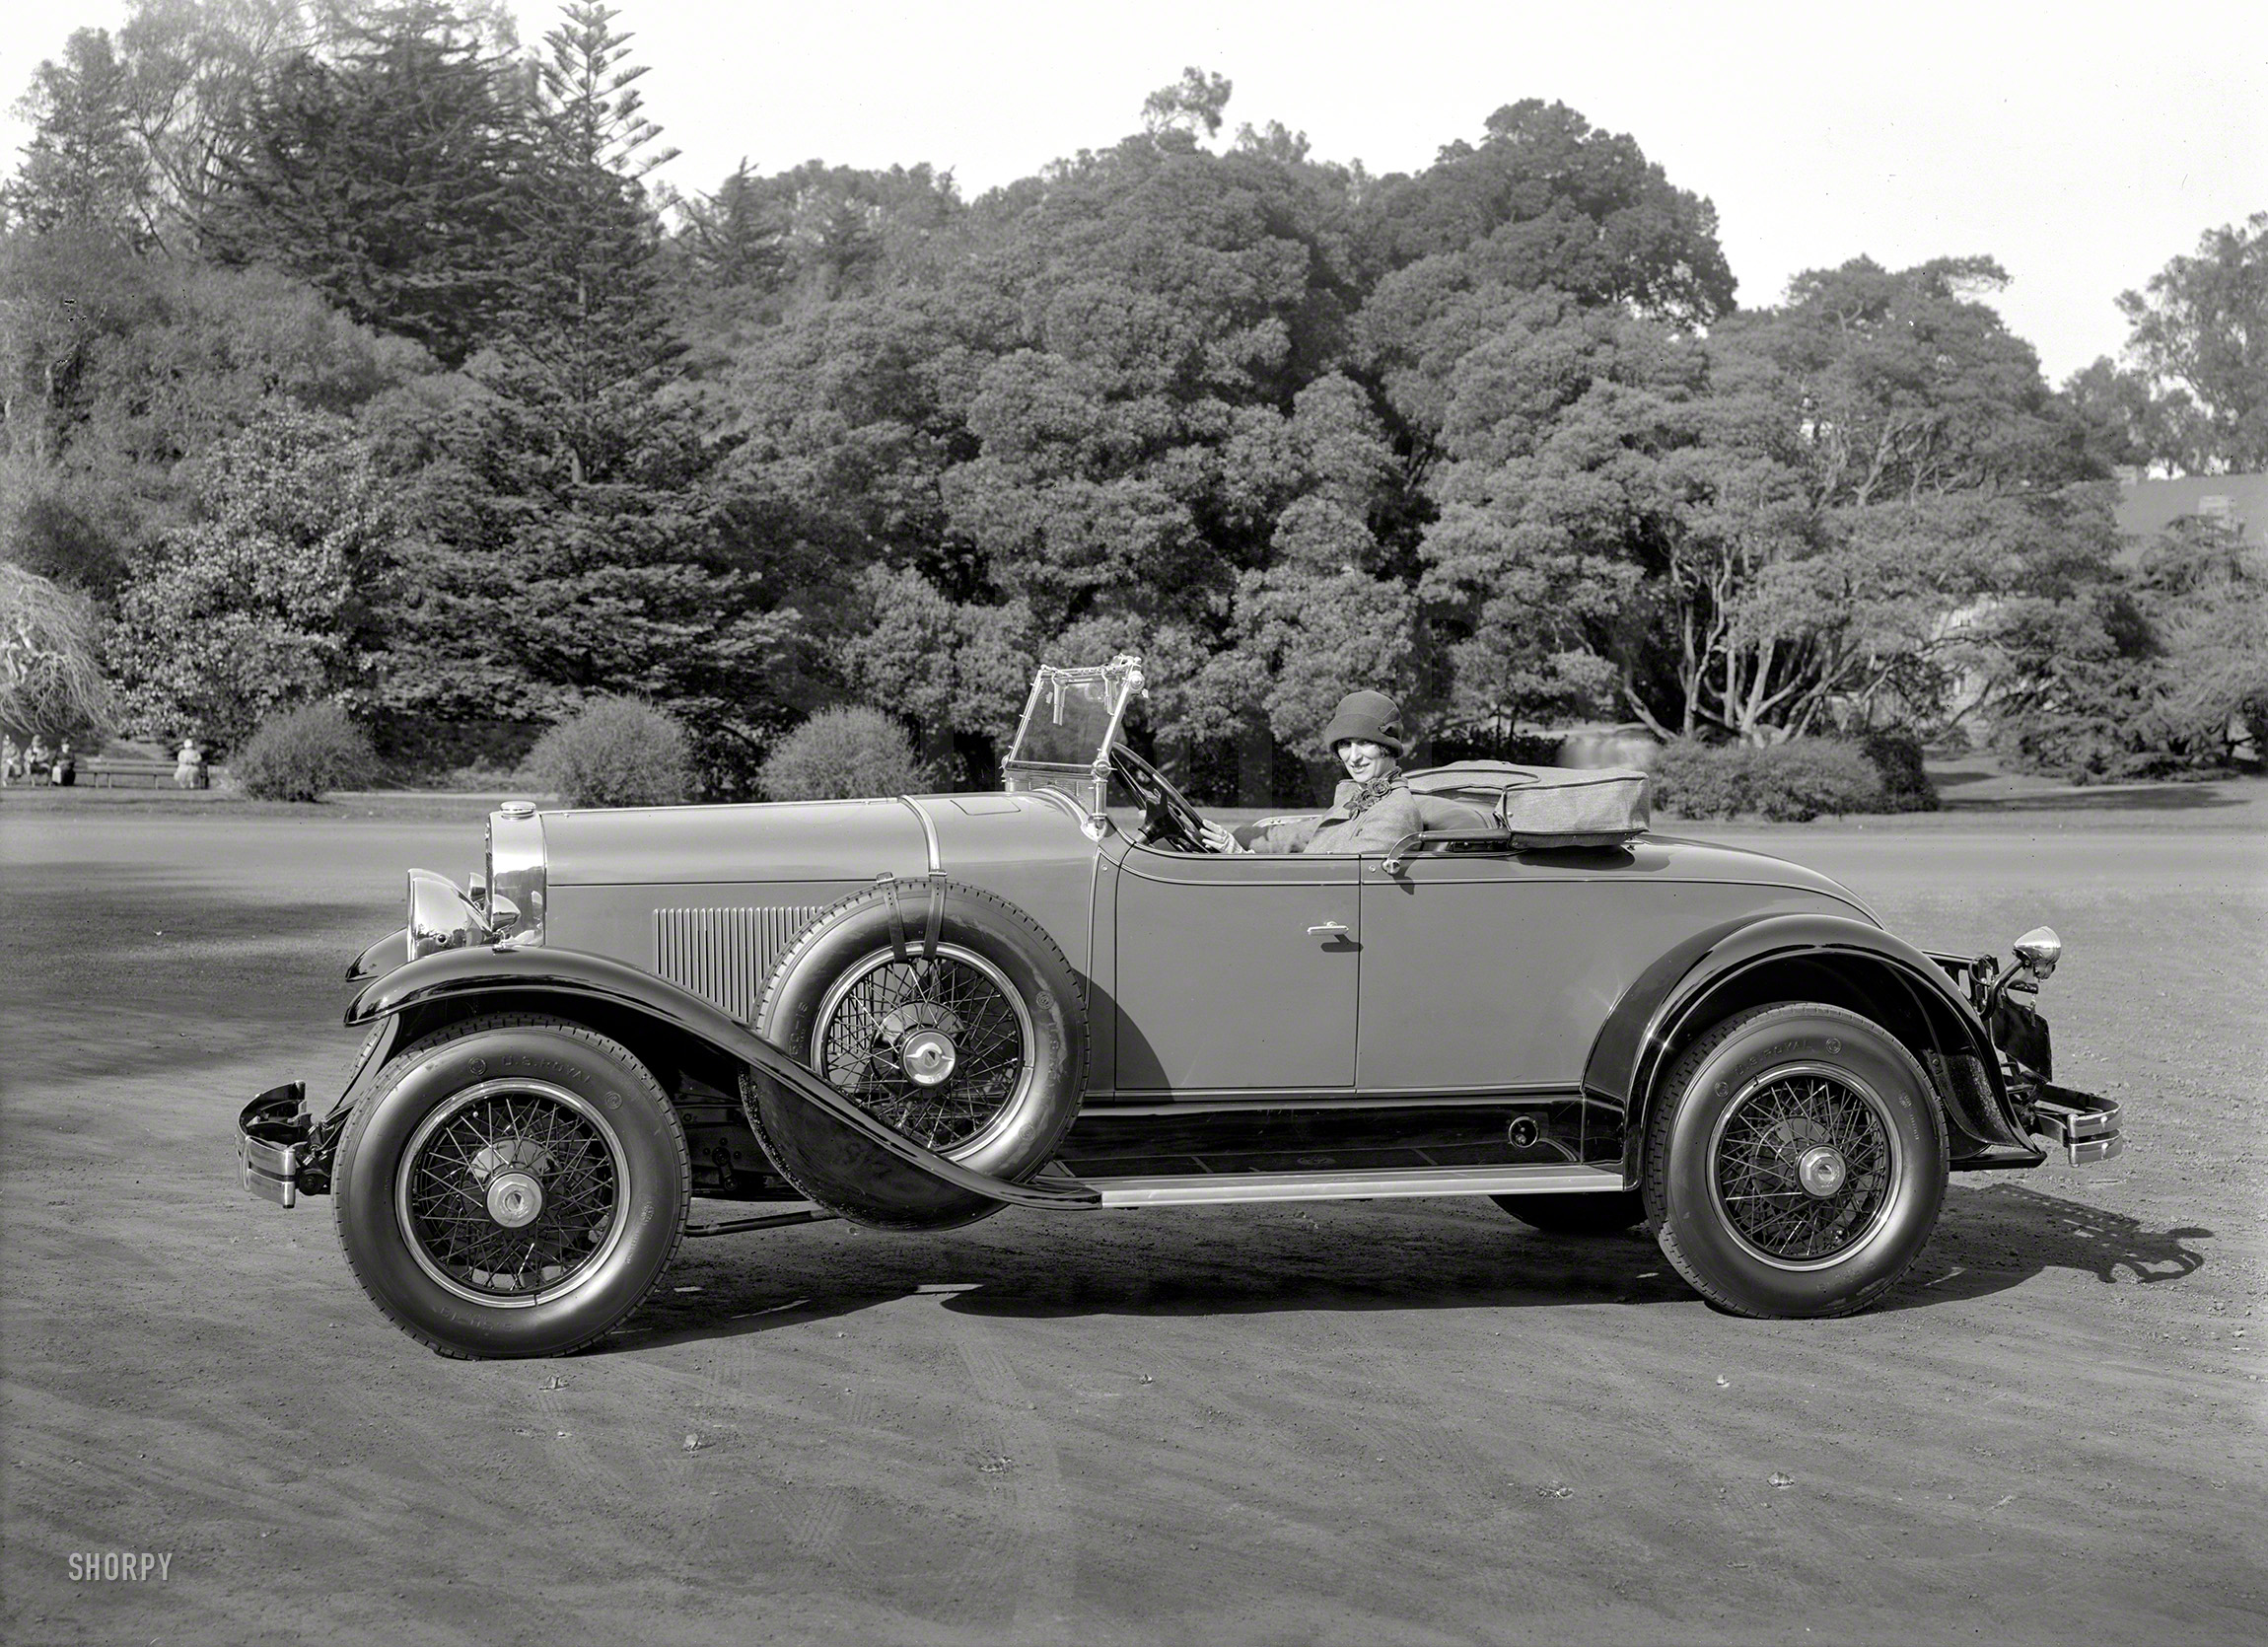 "La Salle Model 328 roadster, Golden Gate Park, San Francisco, 1929." It's all downhill from here! 5x7 glass negative by Christopher Helin. View full size.